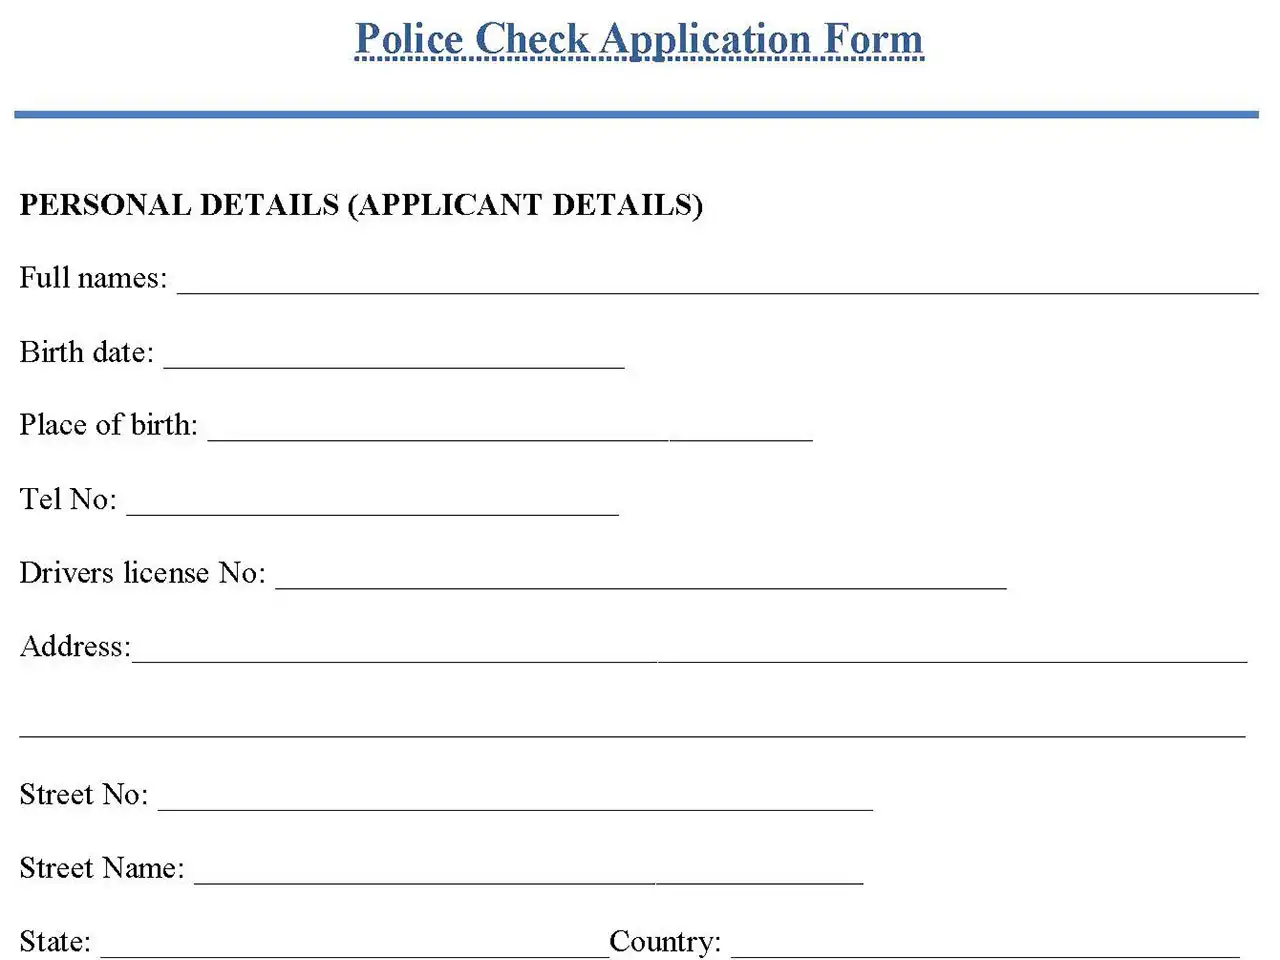 Police check Application Form